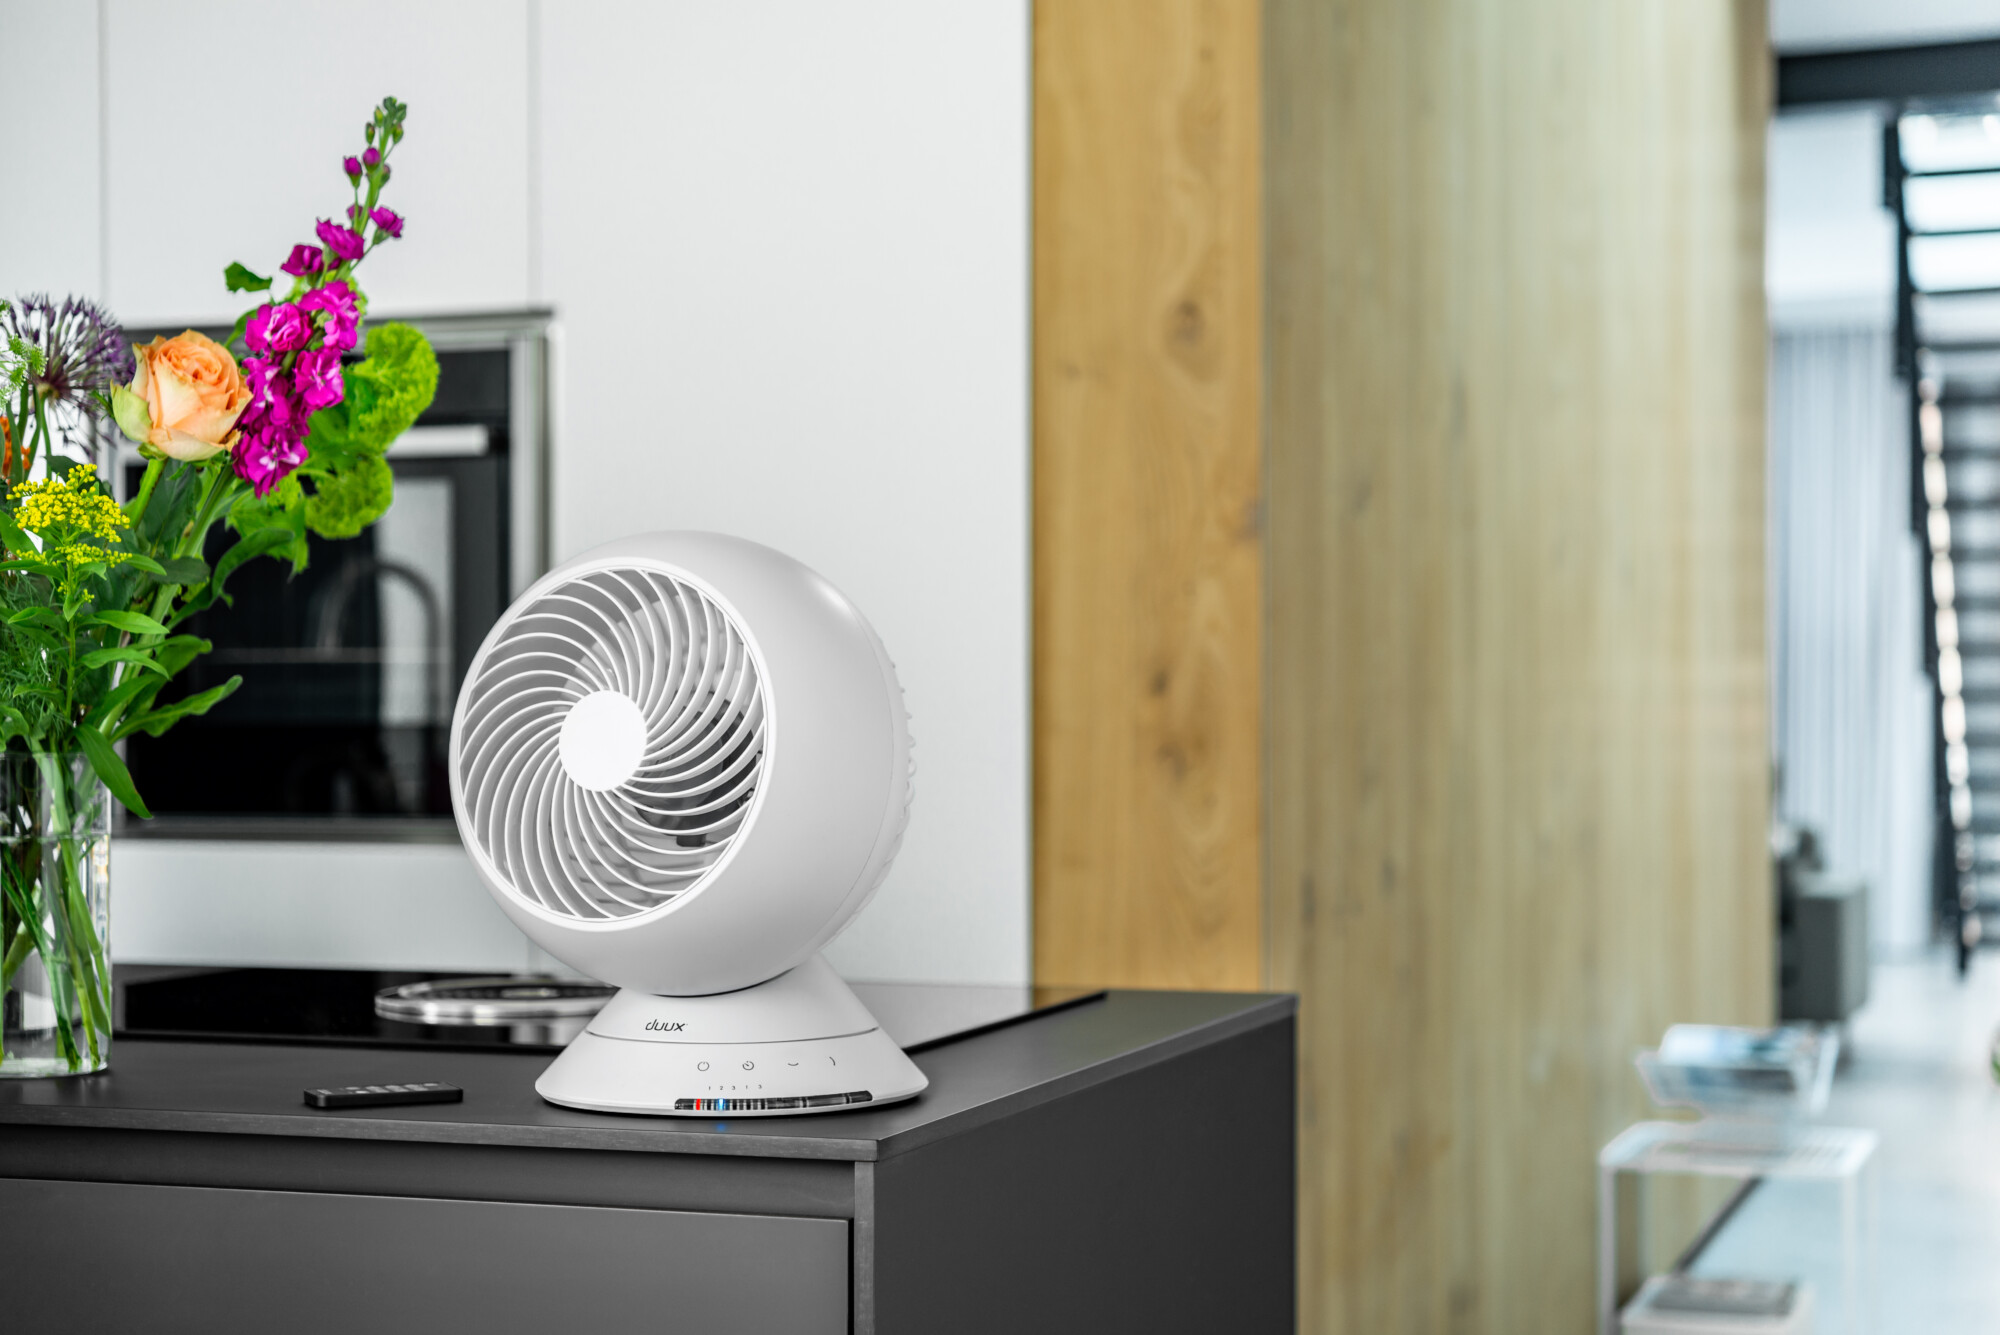 The compact Globe Table Fan in White is a great accessory for your home office desk.